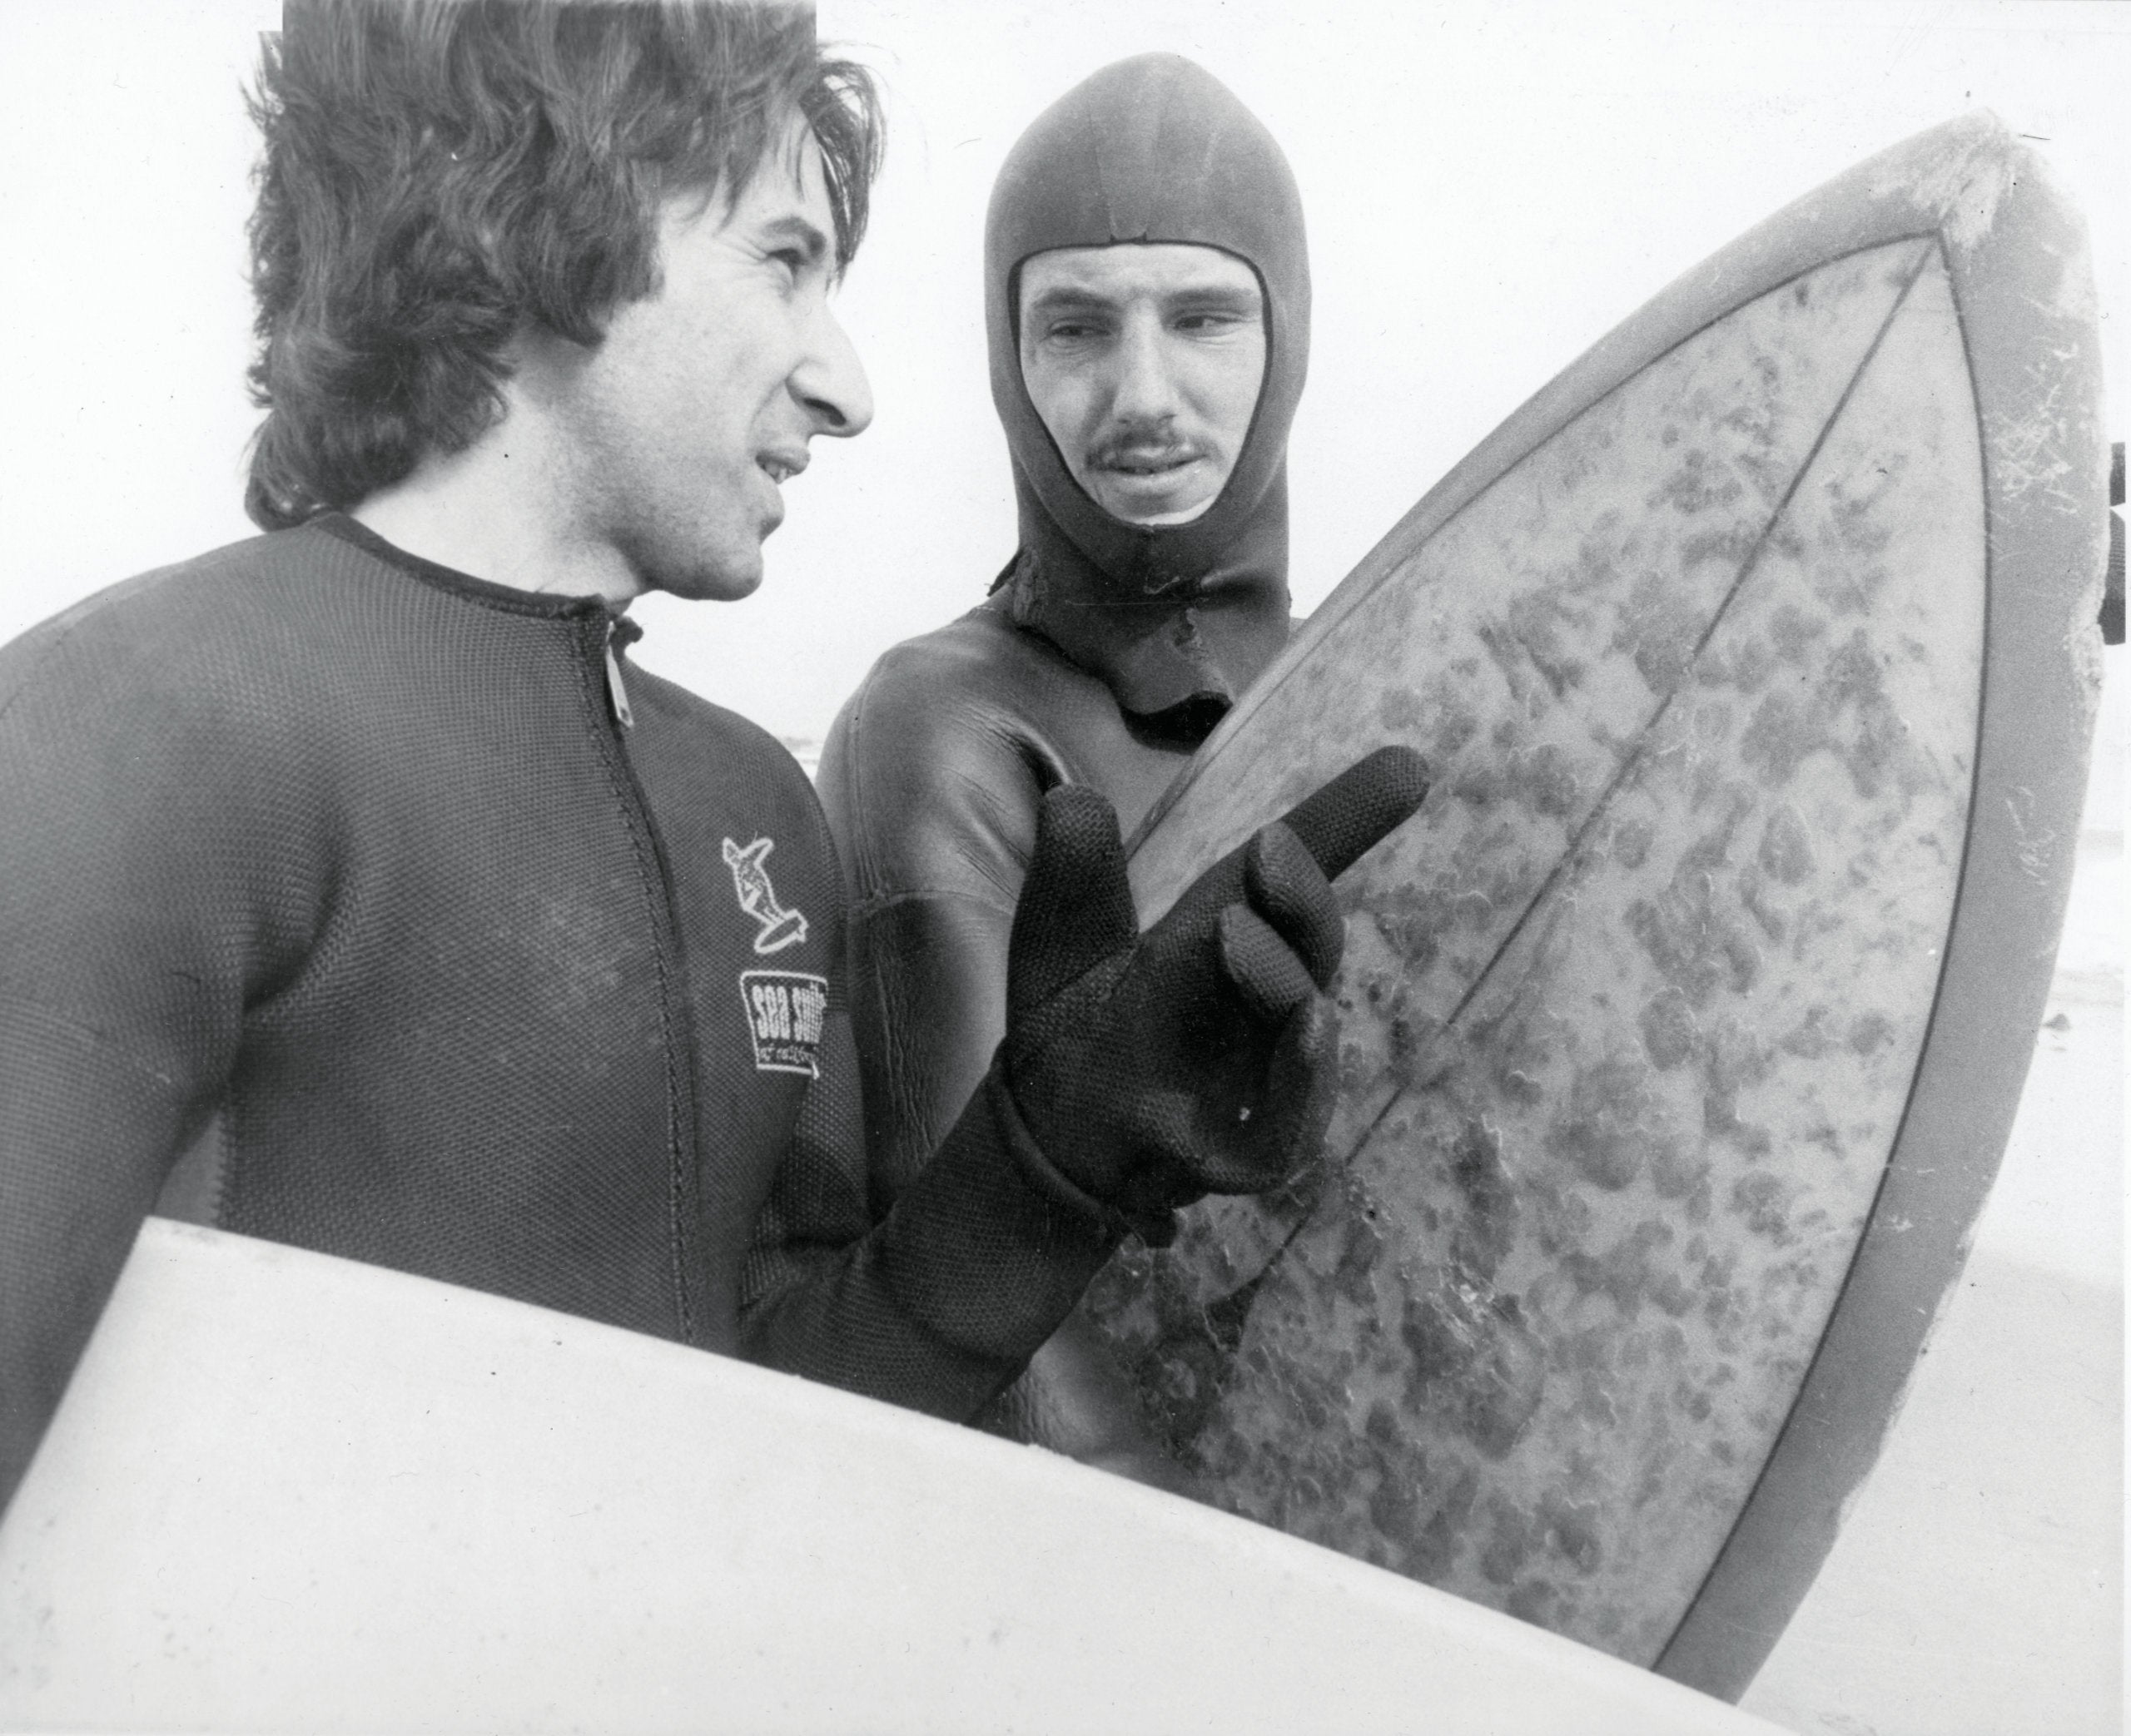 Pan and friend, Mario Frade, at the 1971 URI Winter Surf Contest. Photo: Courtesy Peter Panagiotis